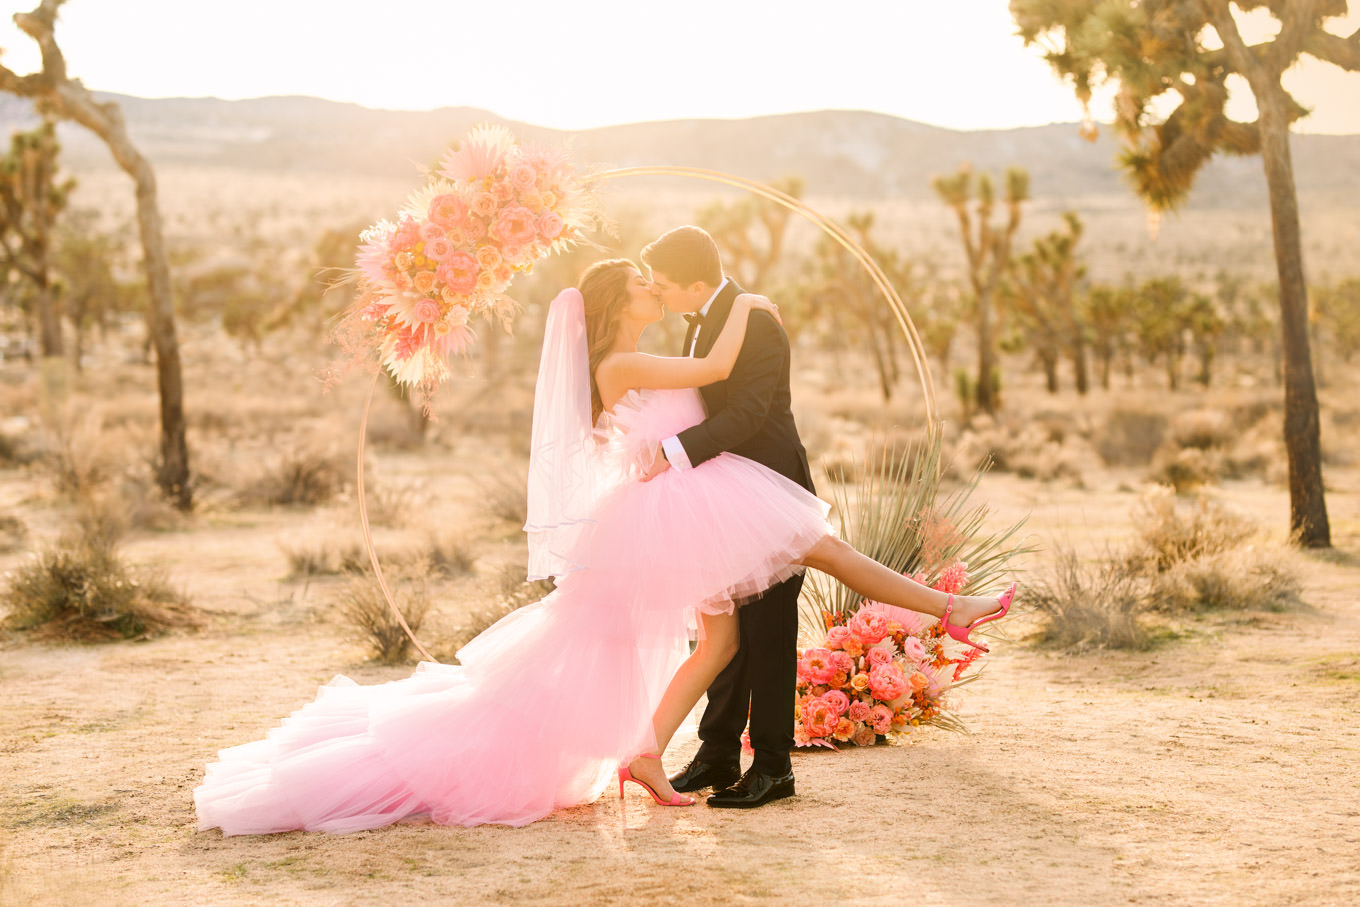 Joshua Tree pink dress elopement | Engagement, elopement, and wedding photography roundup of Mary Costa’s favorite images from 2020 | Colorful and elevated photography for fun-loving couples in Southern California | #2020wedding #elopement #weddingphoto #weddingphotography   Source: Mary Costa Photography | Los Angeles